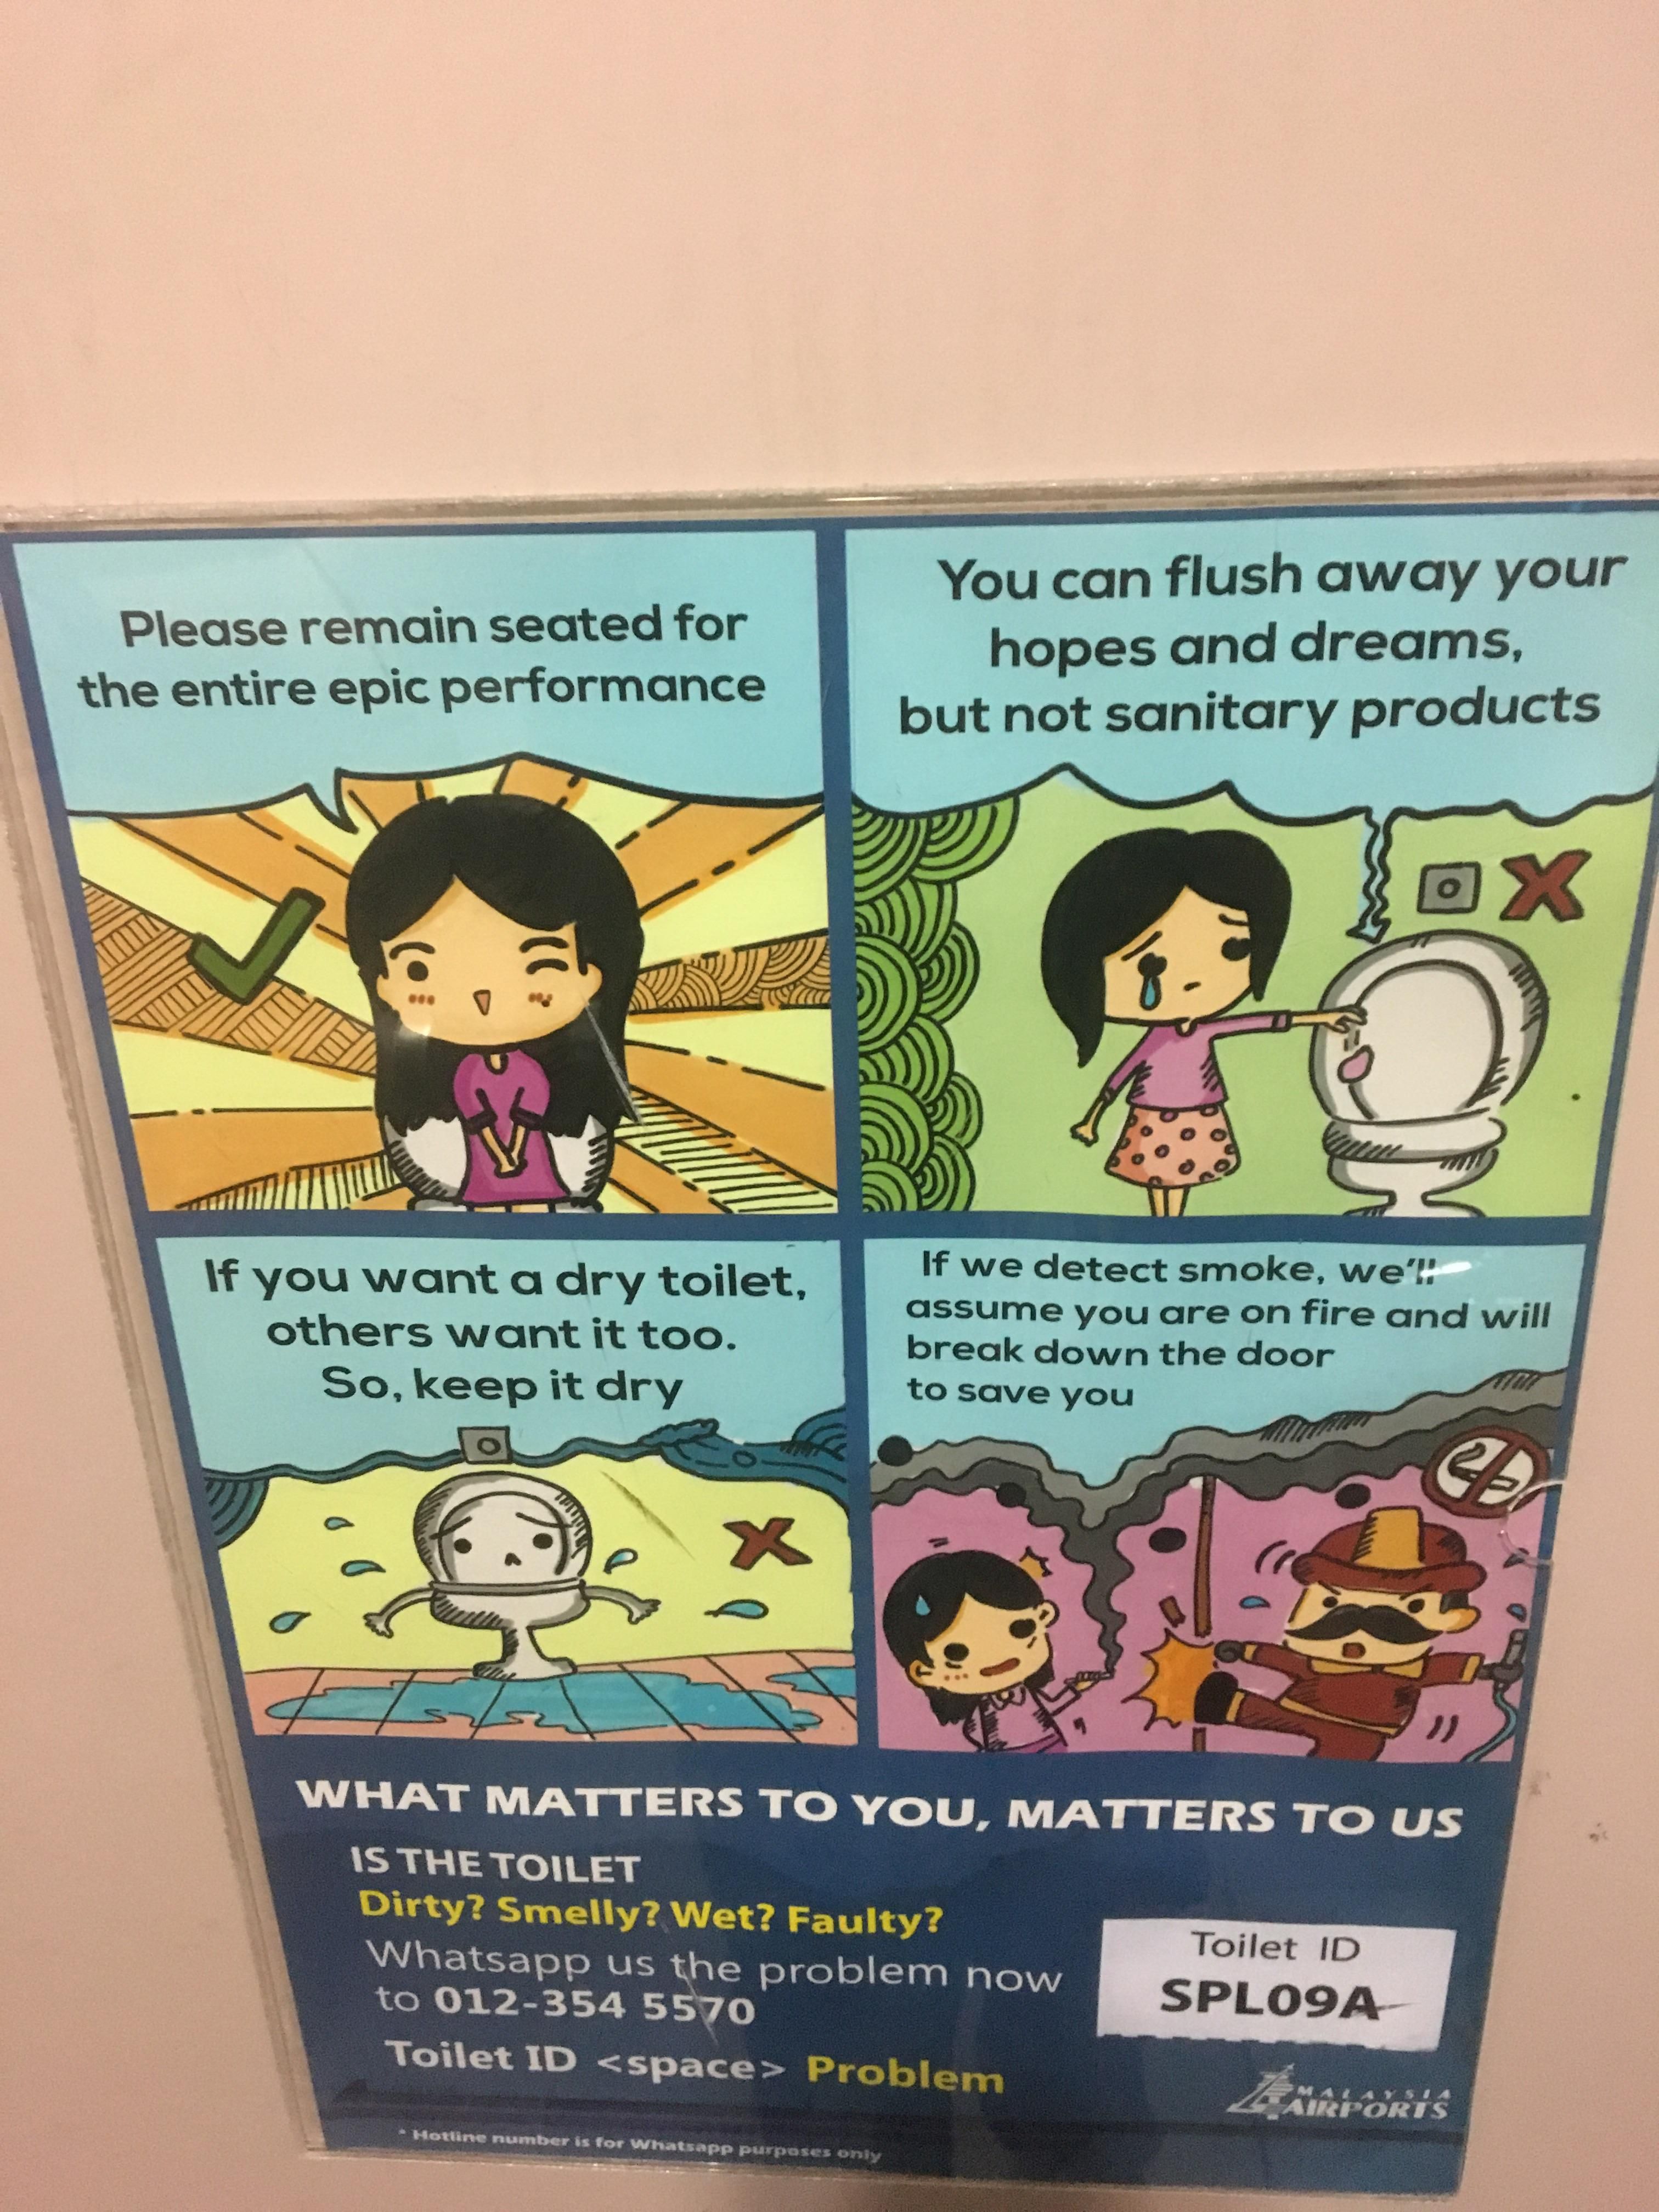 Comedic ladies bathroom signage in KL airport made me giggle